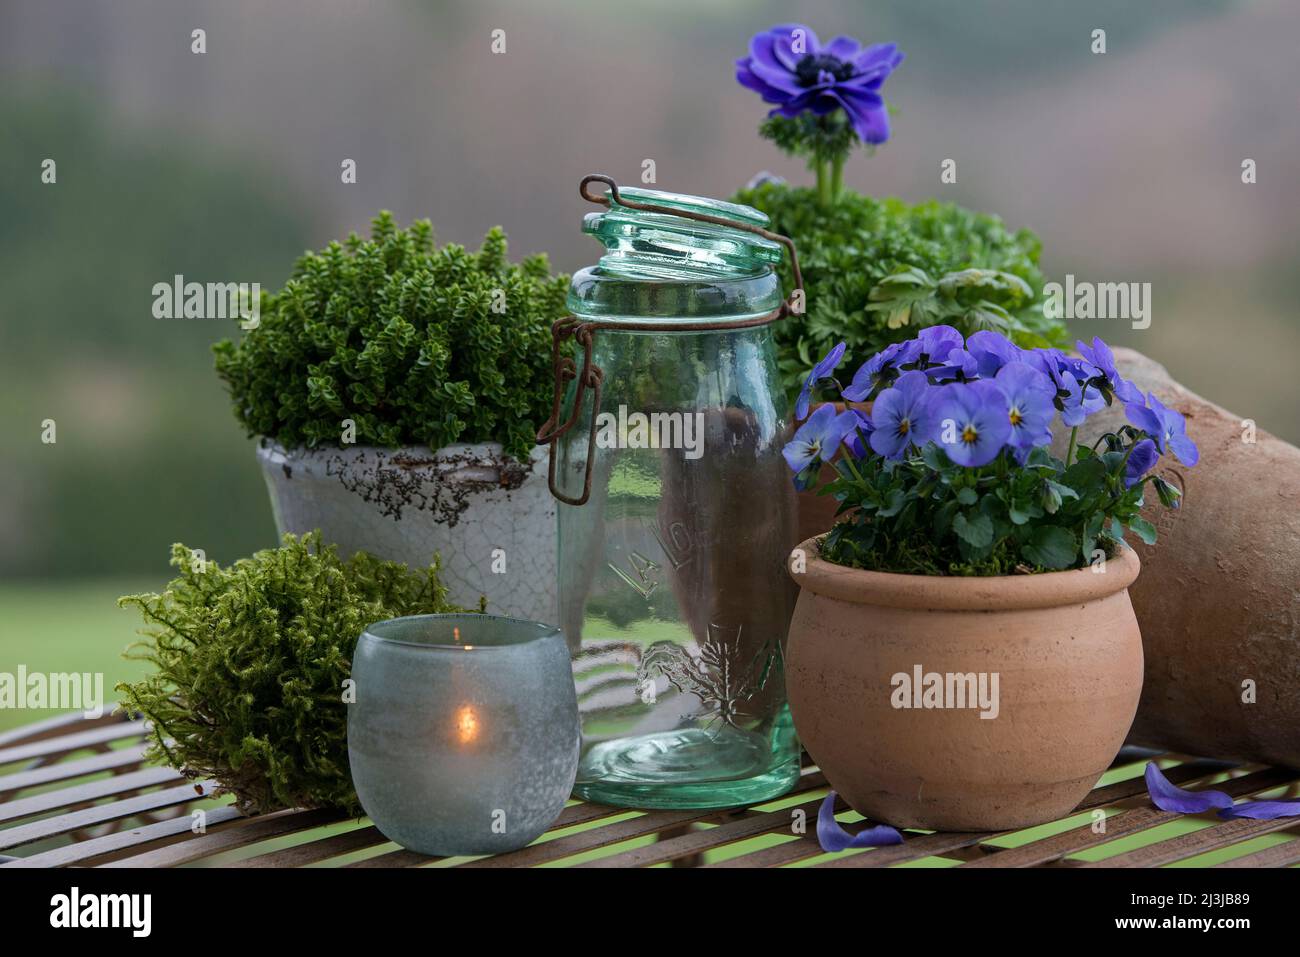 Still life, pots with blue blooming spring flowers, herbs, lantern and storage jar stand on a table Stock Photo